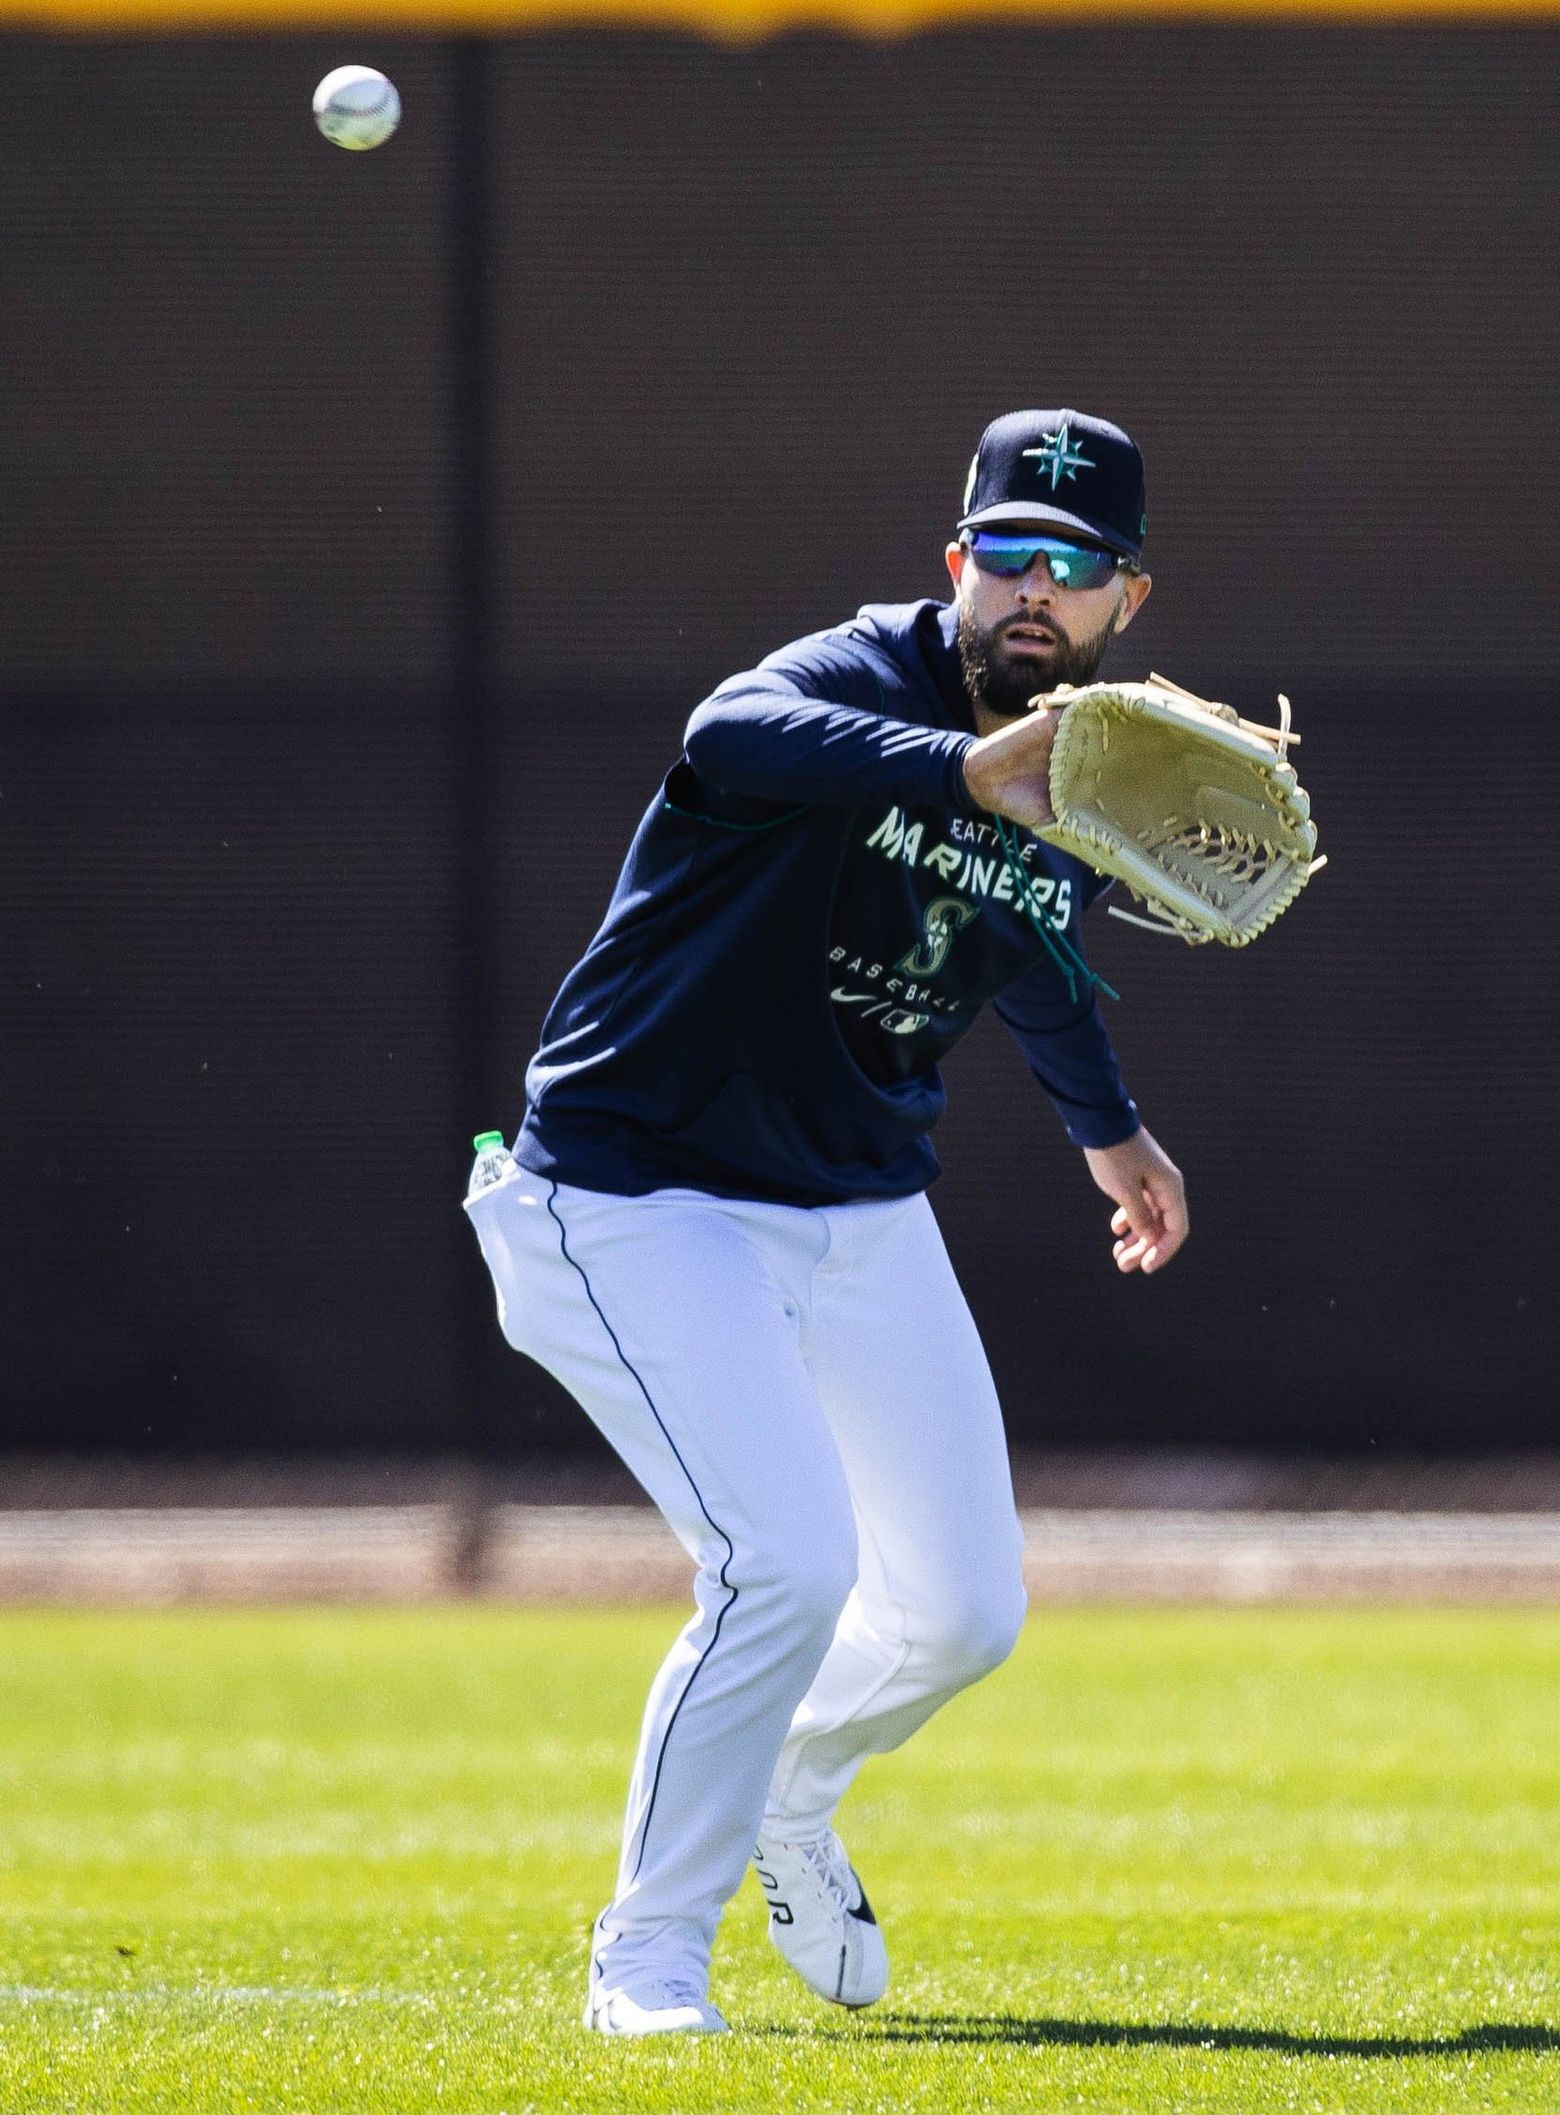 I'm a Mariner now': Outfielder Jesse Winker embraces trade to Seattle